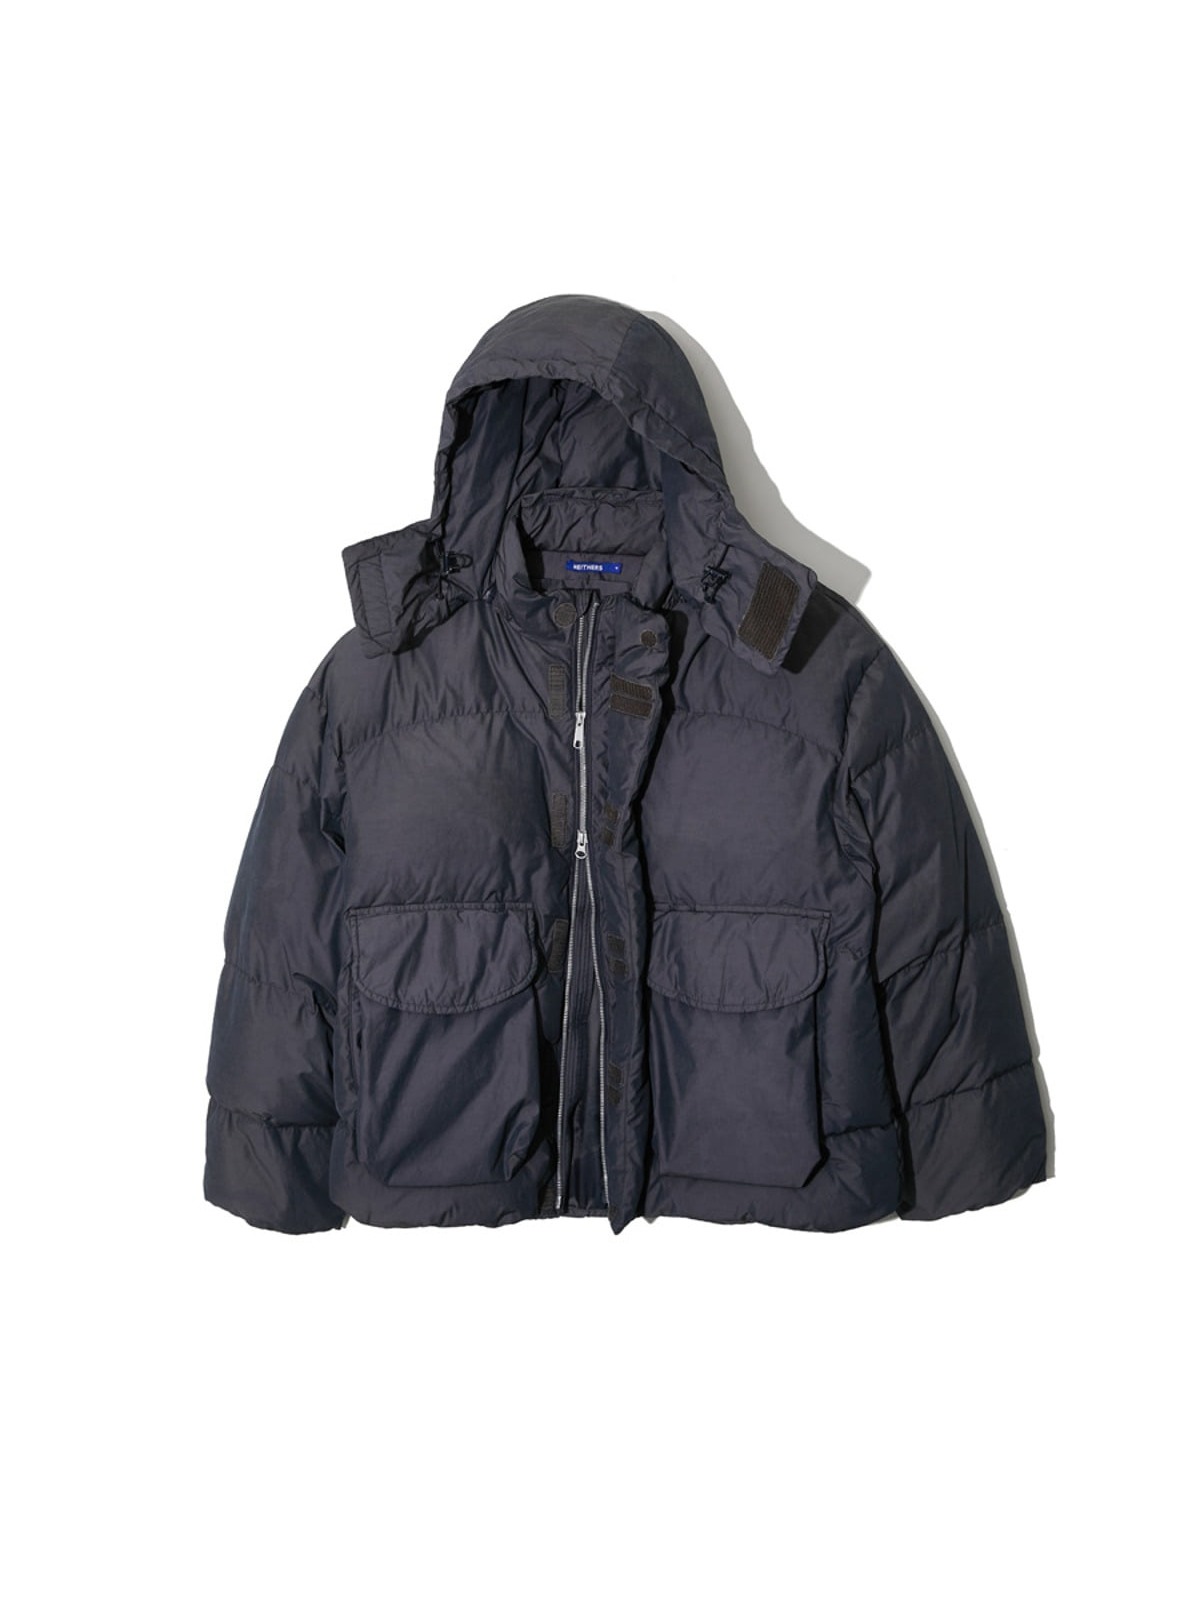 Discolored Goose Down Detachable Hooded Jacket (Navy)